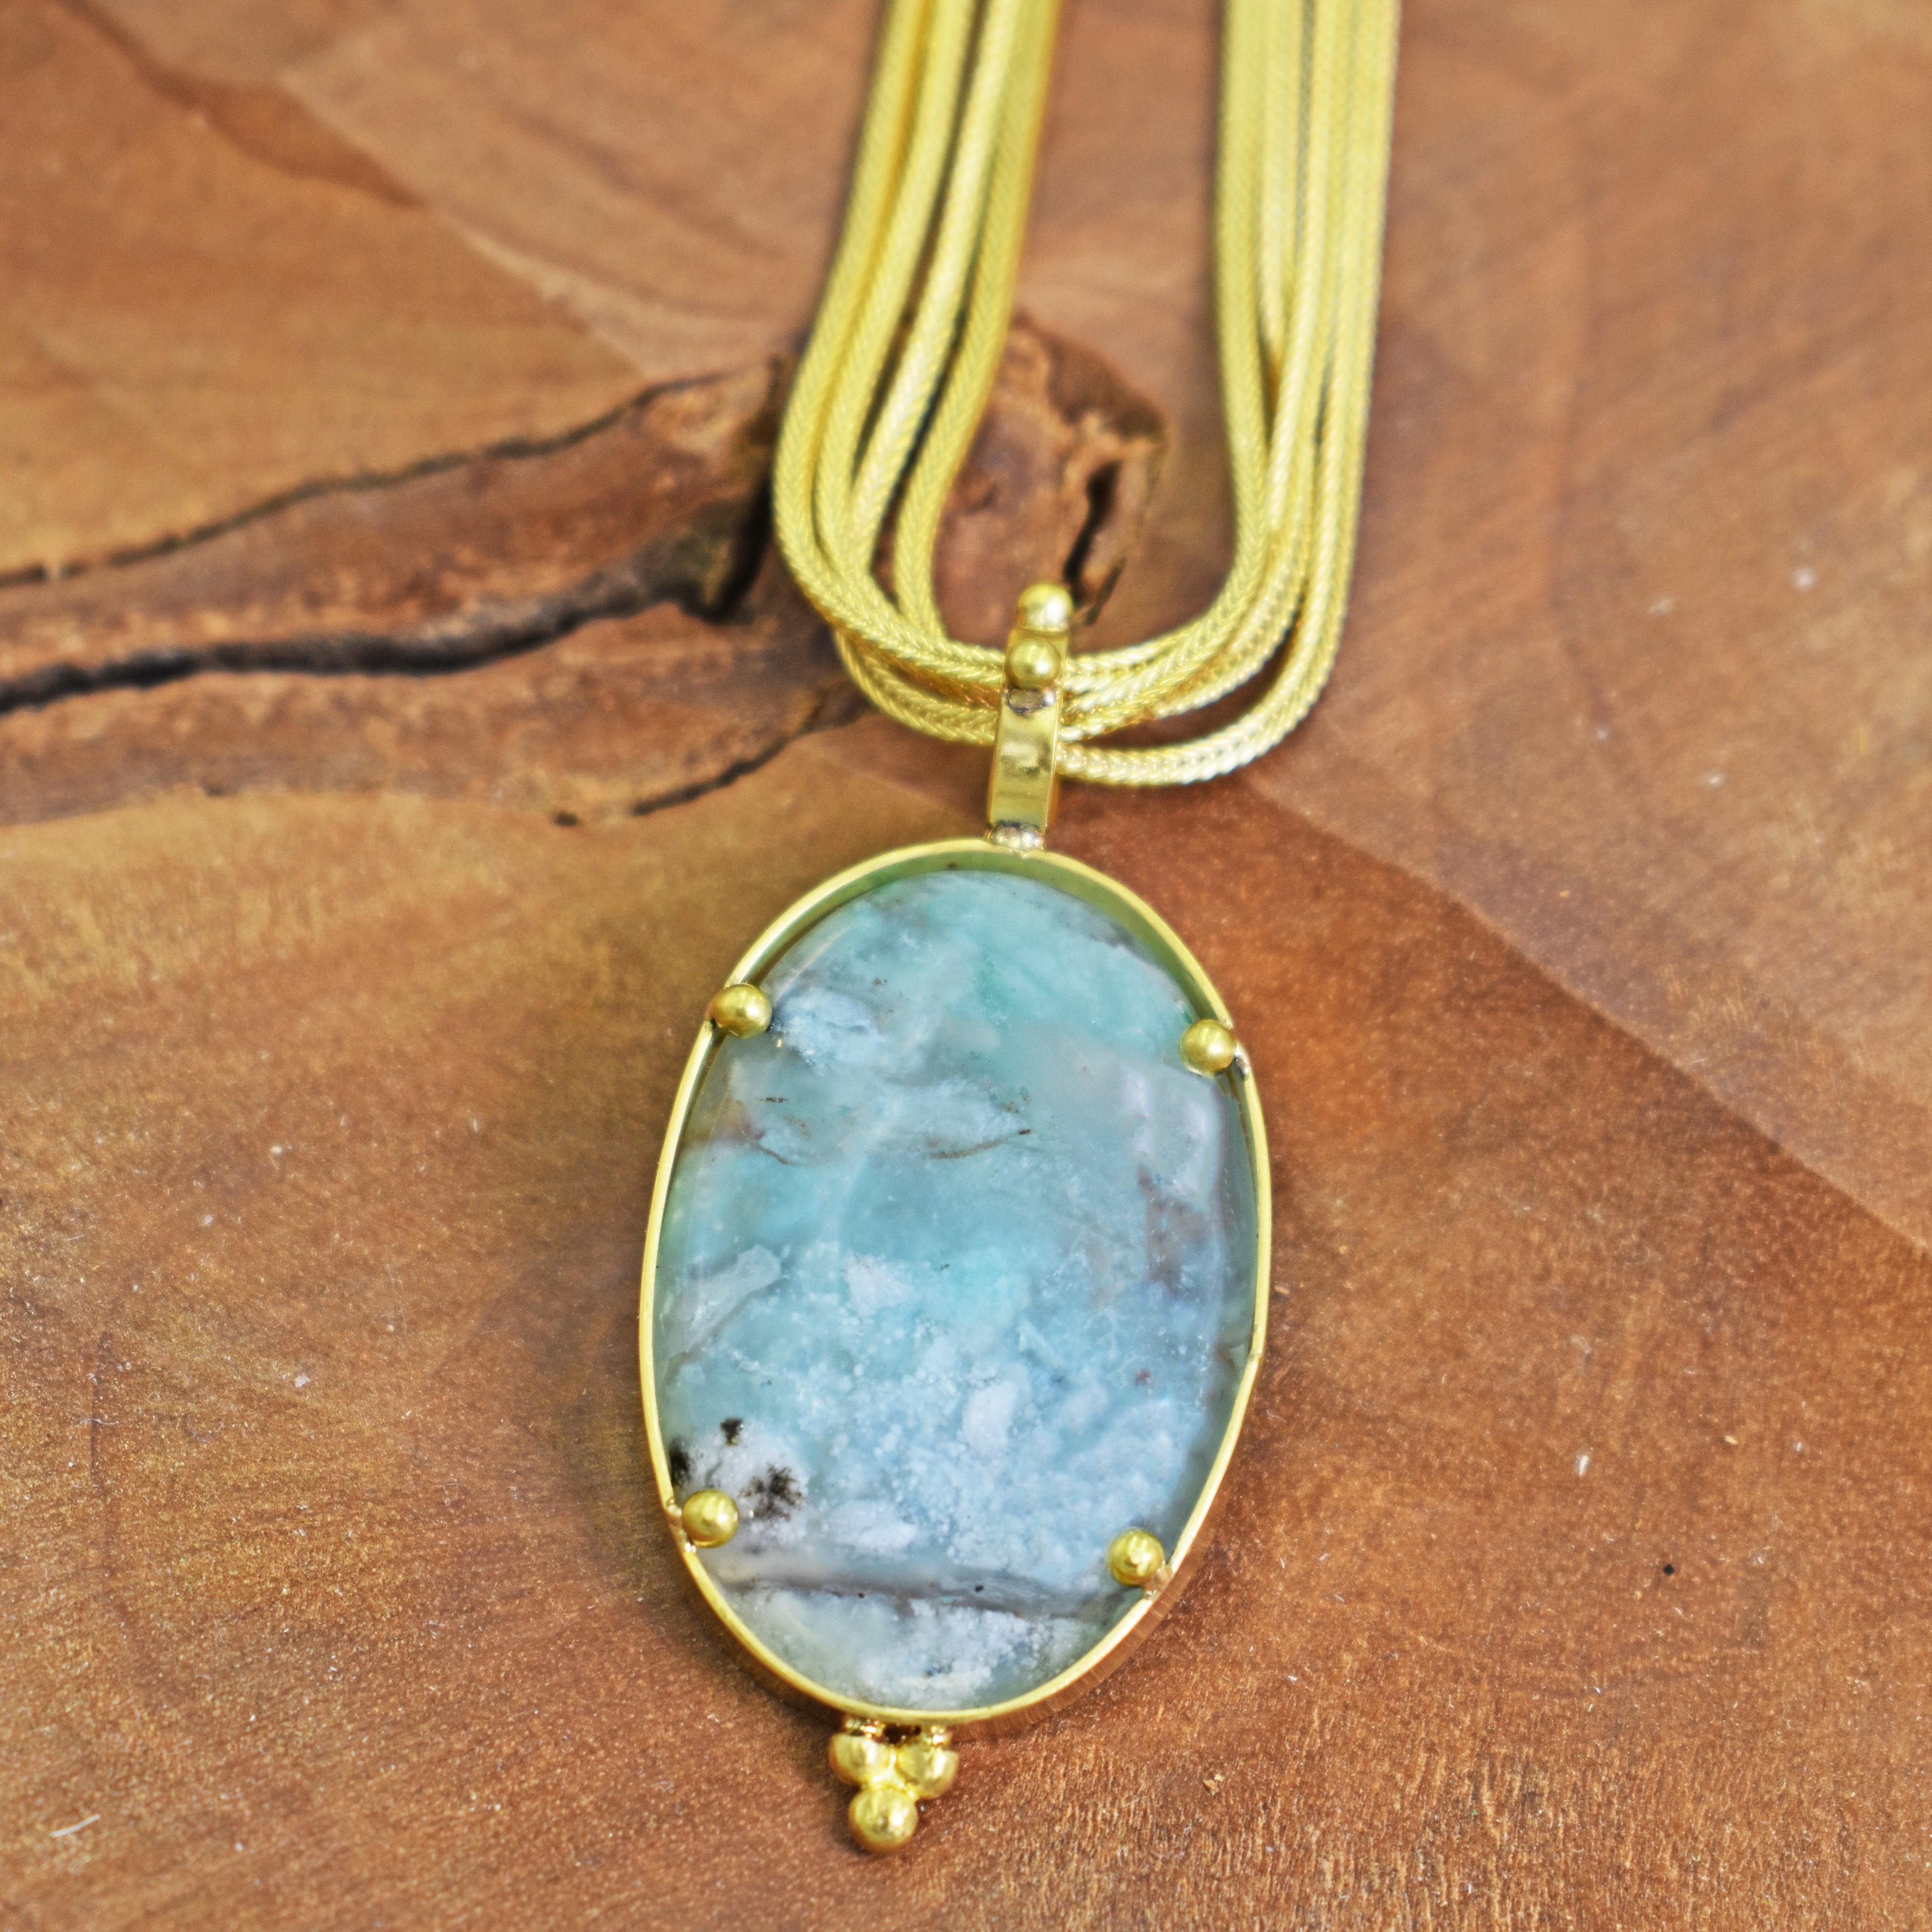 Gorgeous, one-of-a-kind Aquaprase and 22k yellow gold pendant with beaded details on a four-strand 18k gold foxtail chain necklace. Aquaprase is one of the most recently discovered gemstones, being unearthed in 2014 by a gem explorer in Africa. Its'